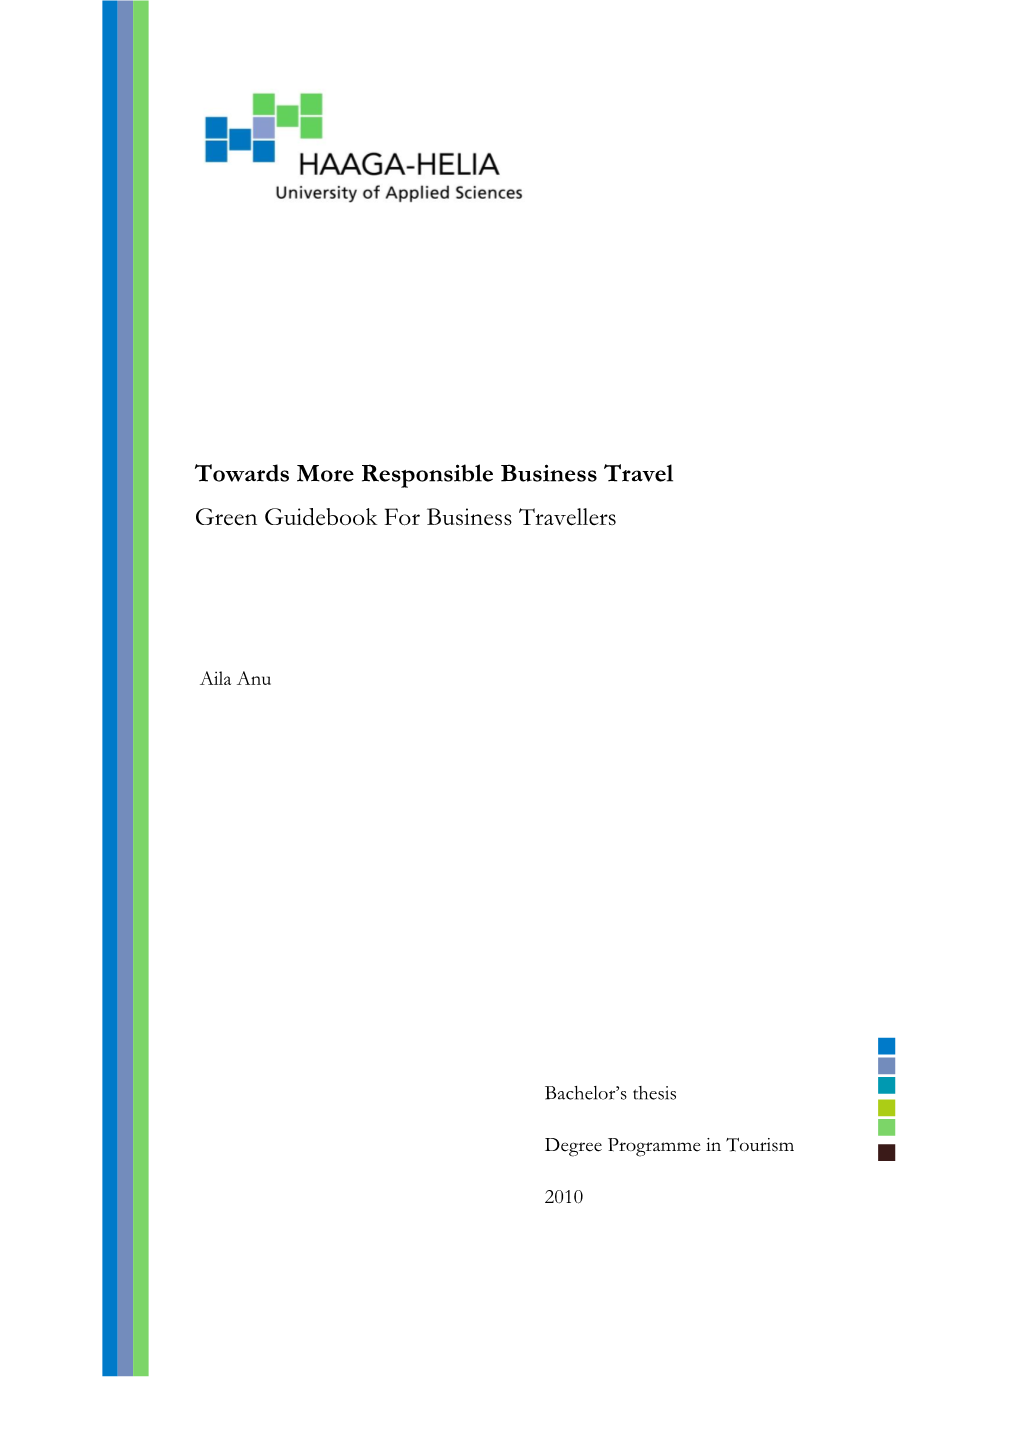 Towards More Responsible Business Travel Green Guidebook for Business Travellers